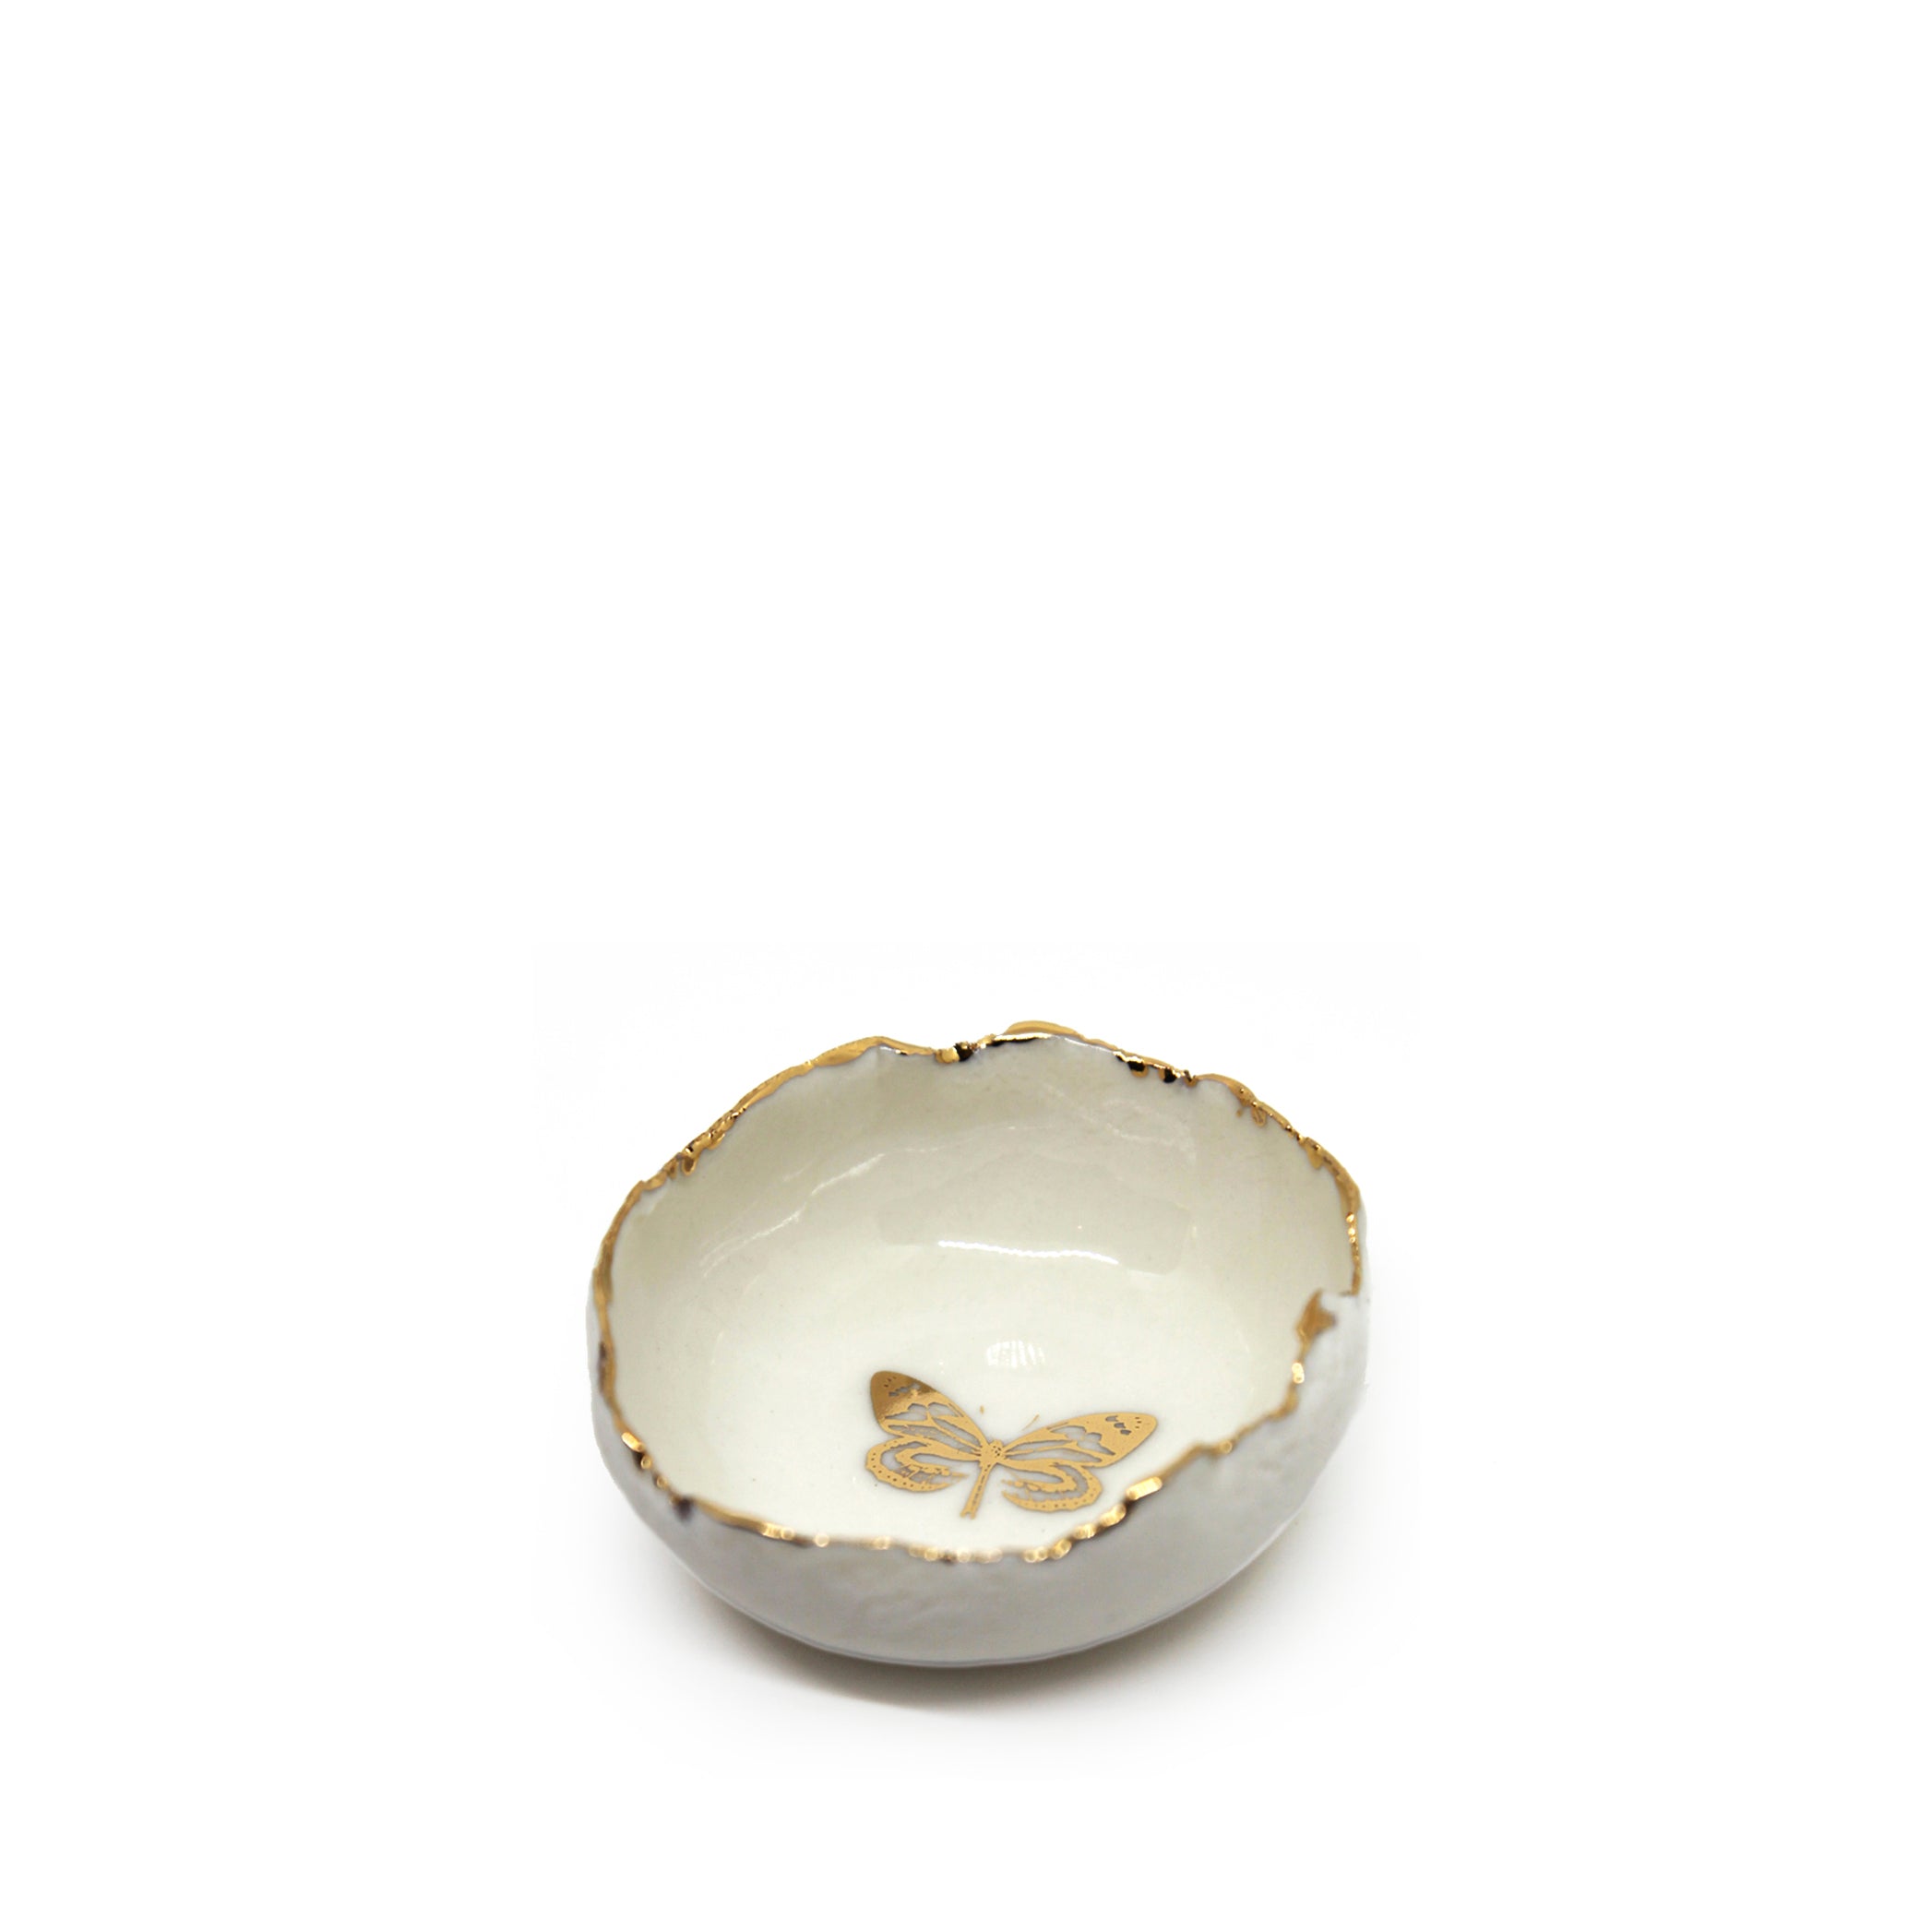 HB Jagged Bowl with Gold Butterfly, 7cm